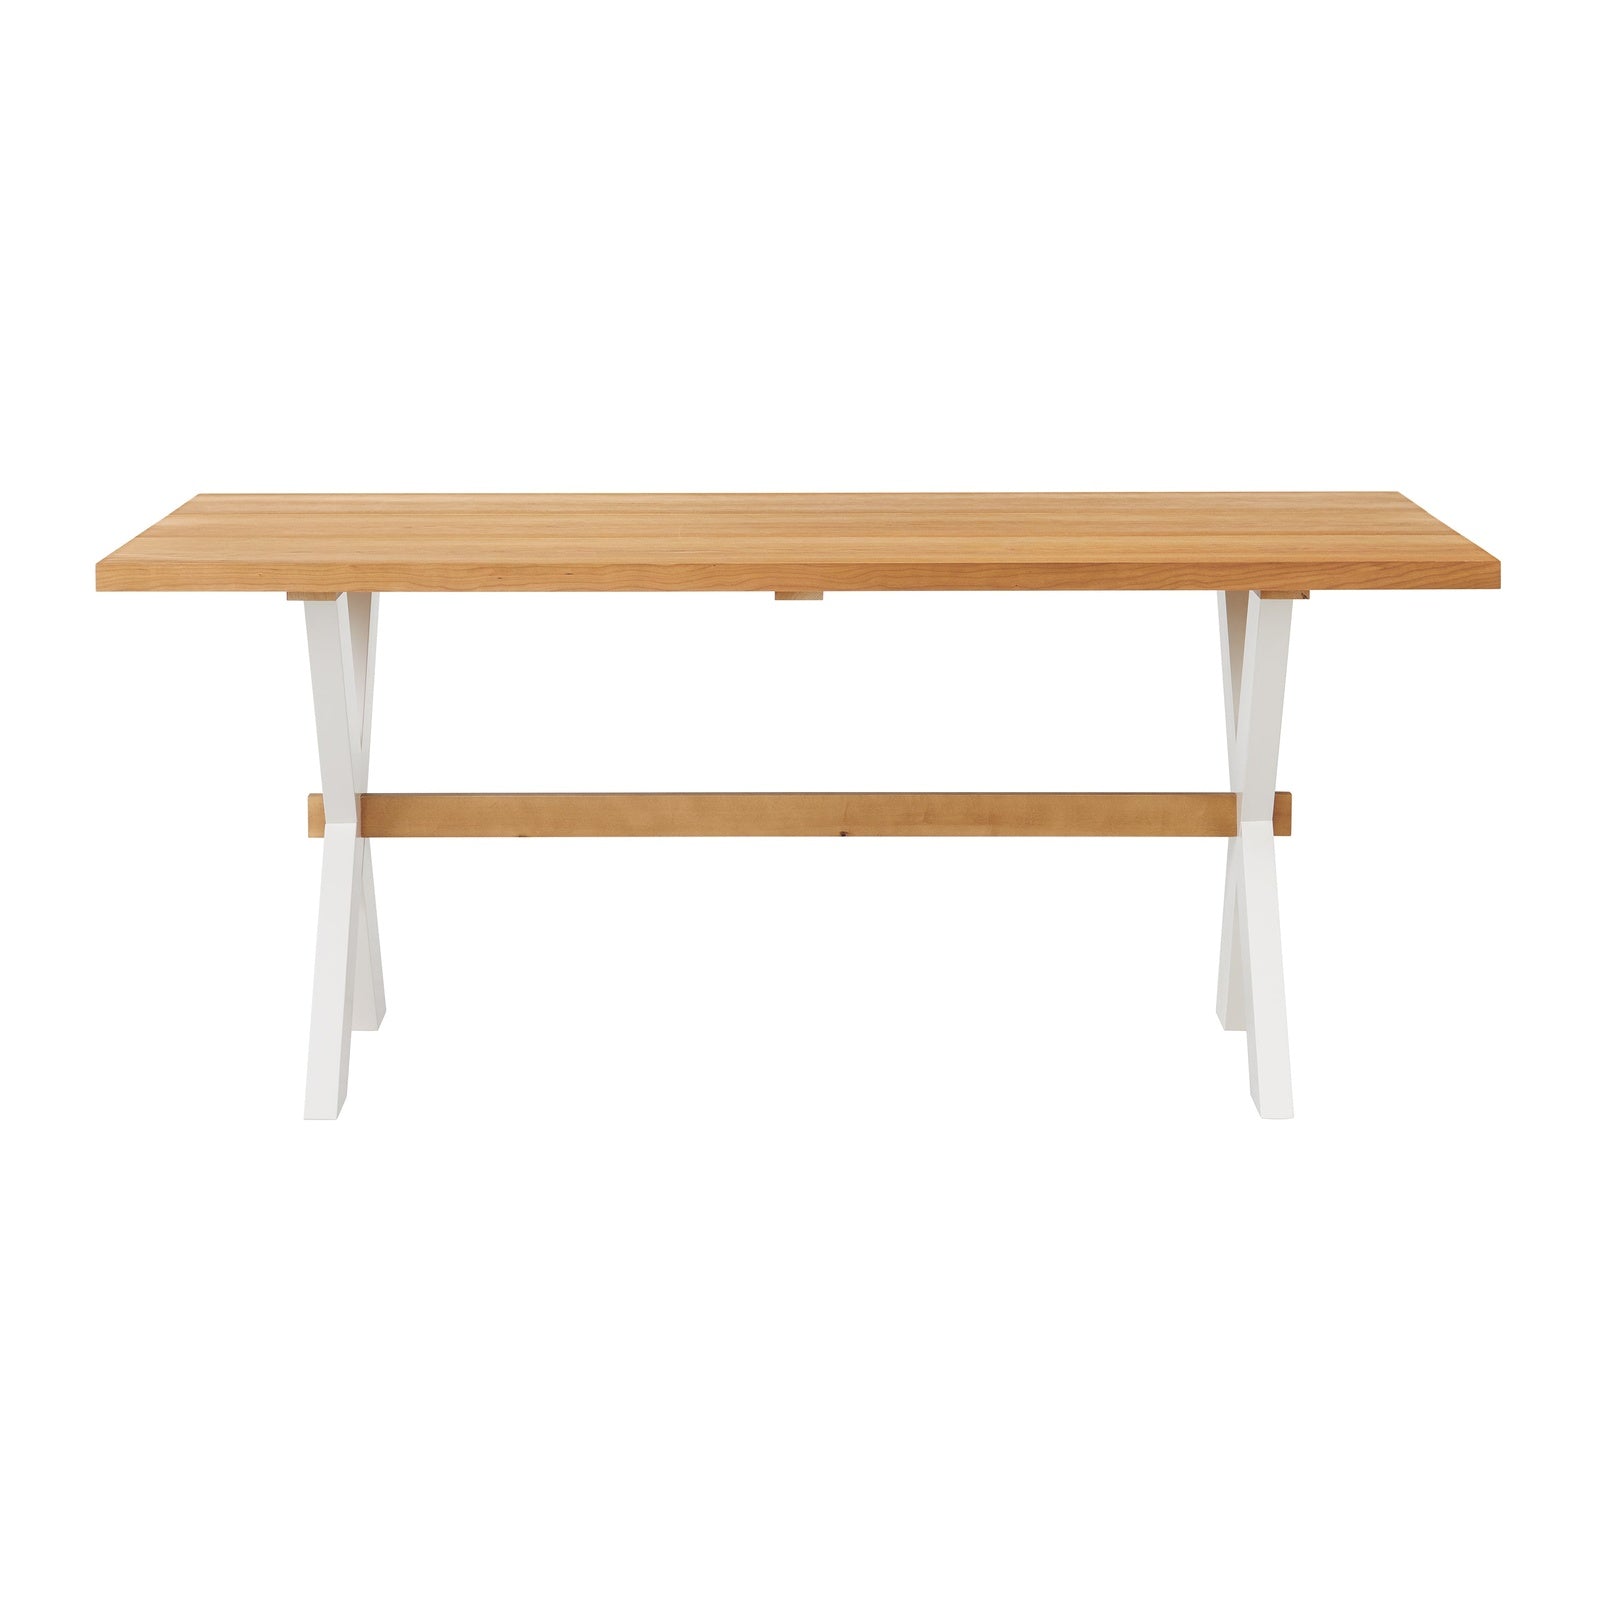 Chelsea 72" Dining Table - Pier 1